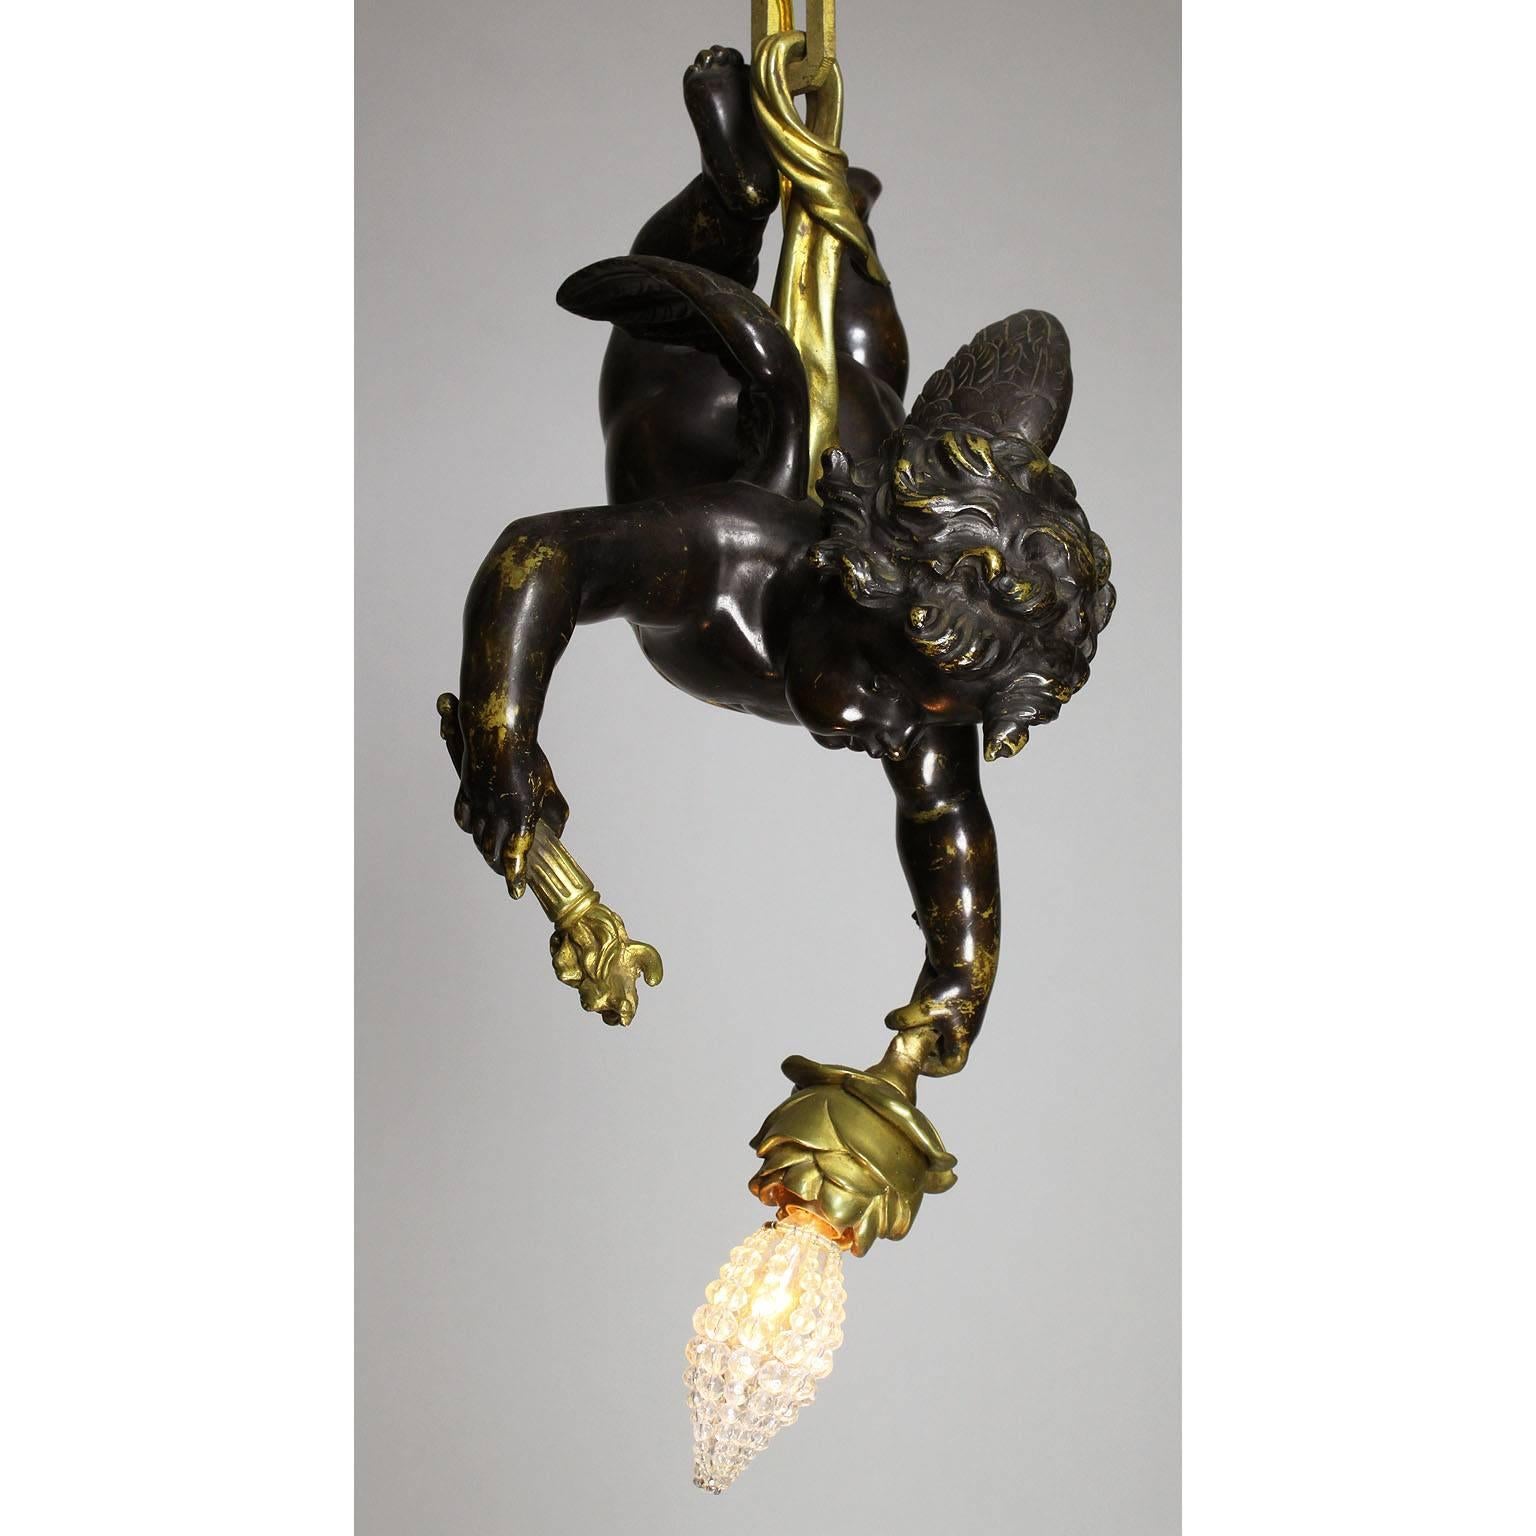 A fine French 19th-20th century Belle Époque patinated and gilt bronze single-light figural cherub chandelier pendant. The hovering patinated bronze cherub suspended by a gilt-bronze strap wrapped around his belly, holding a single-flame-torch and a